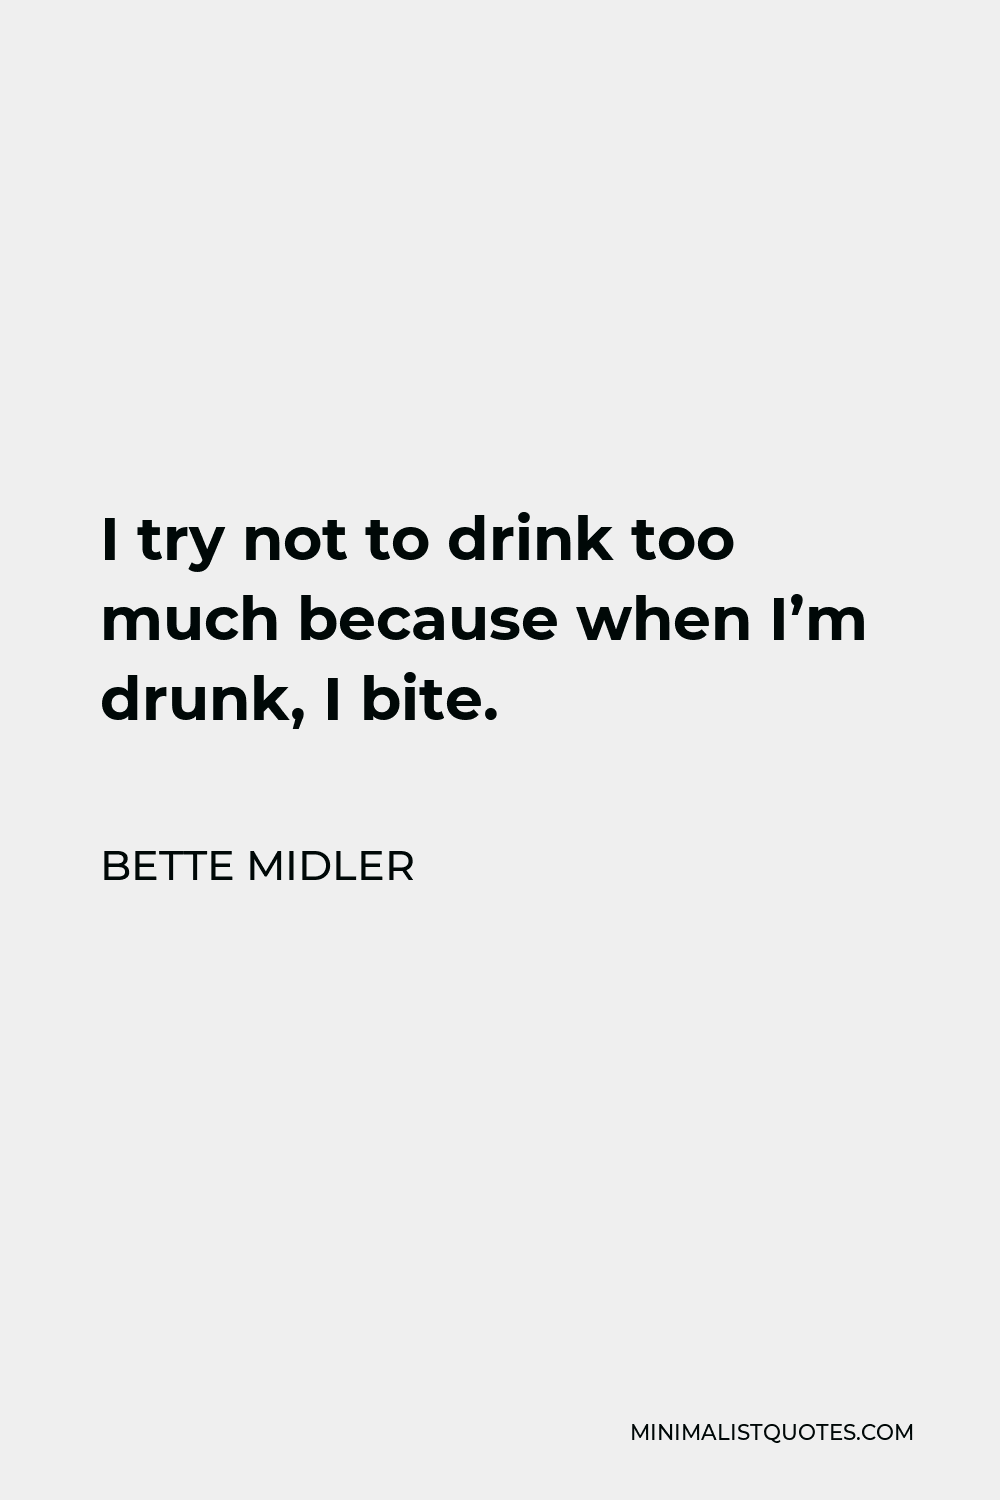 Bette Midler Quote - I try not to drink too much because when I’m drunk, I bite.